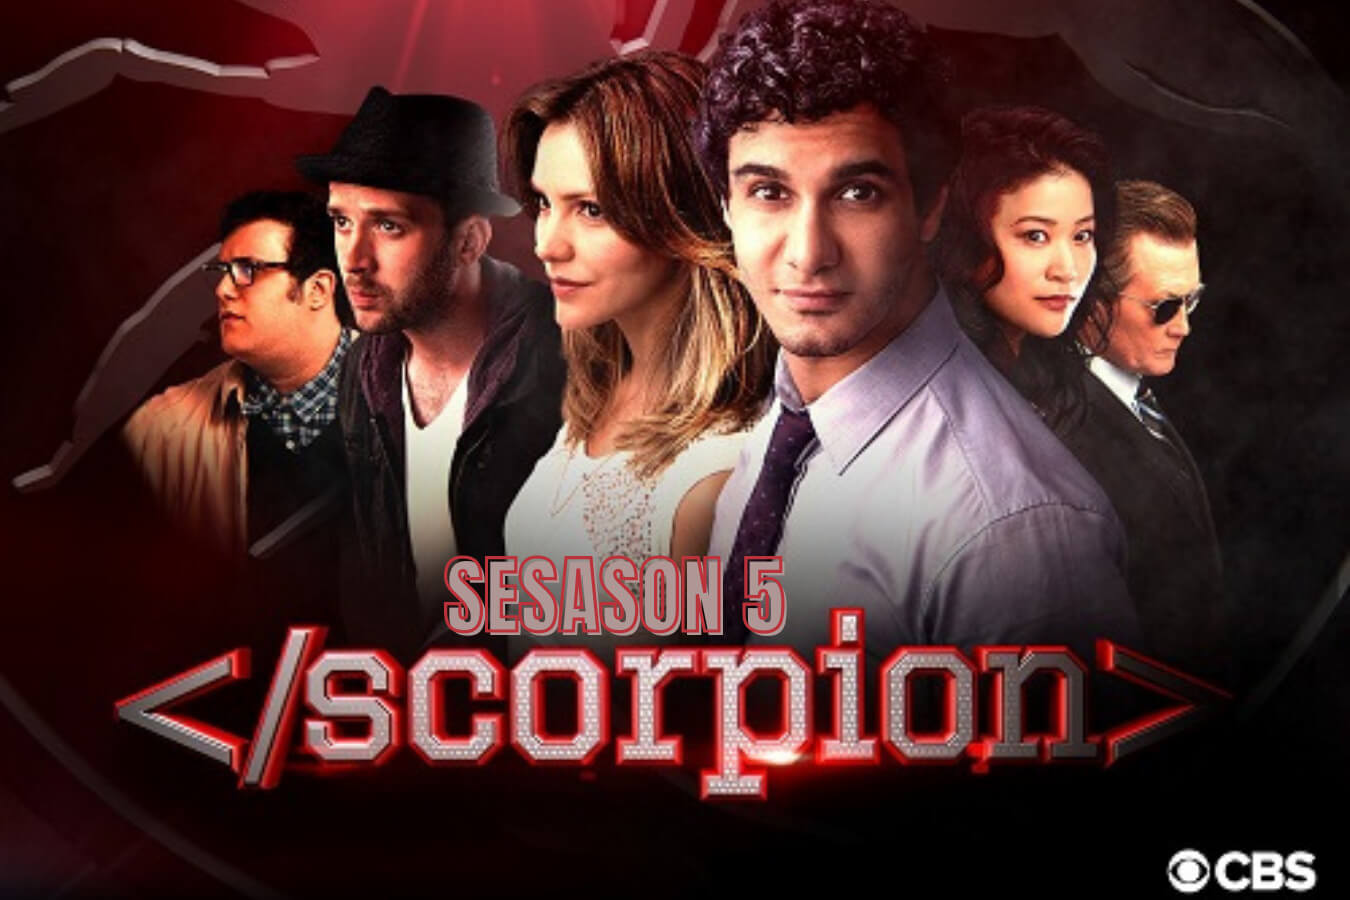 Is There Any News Of Scorpion Season 5 Trailer?